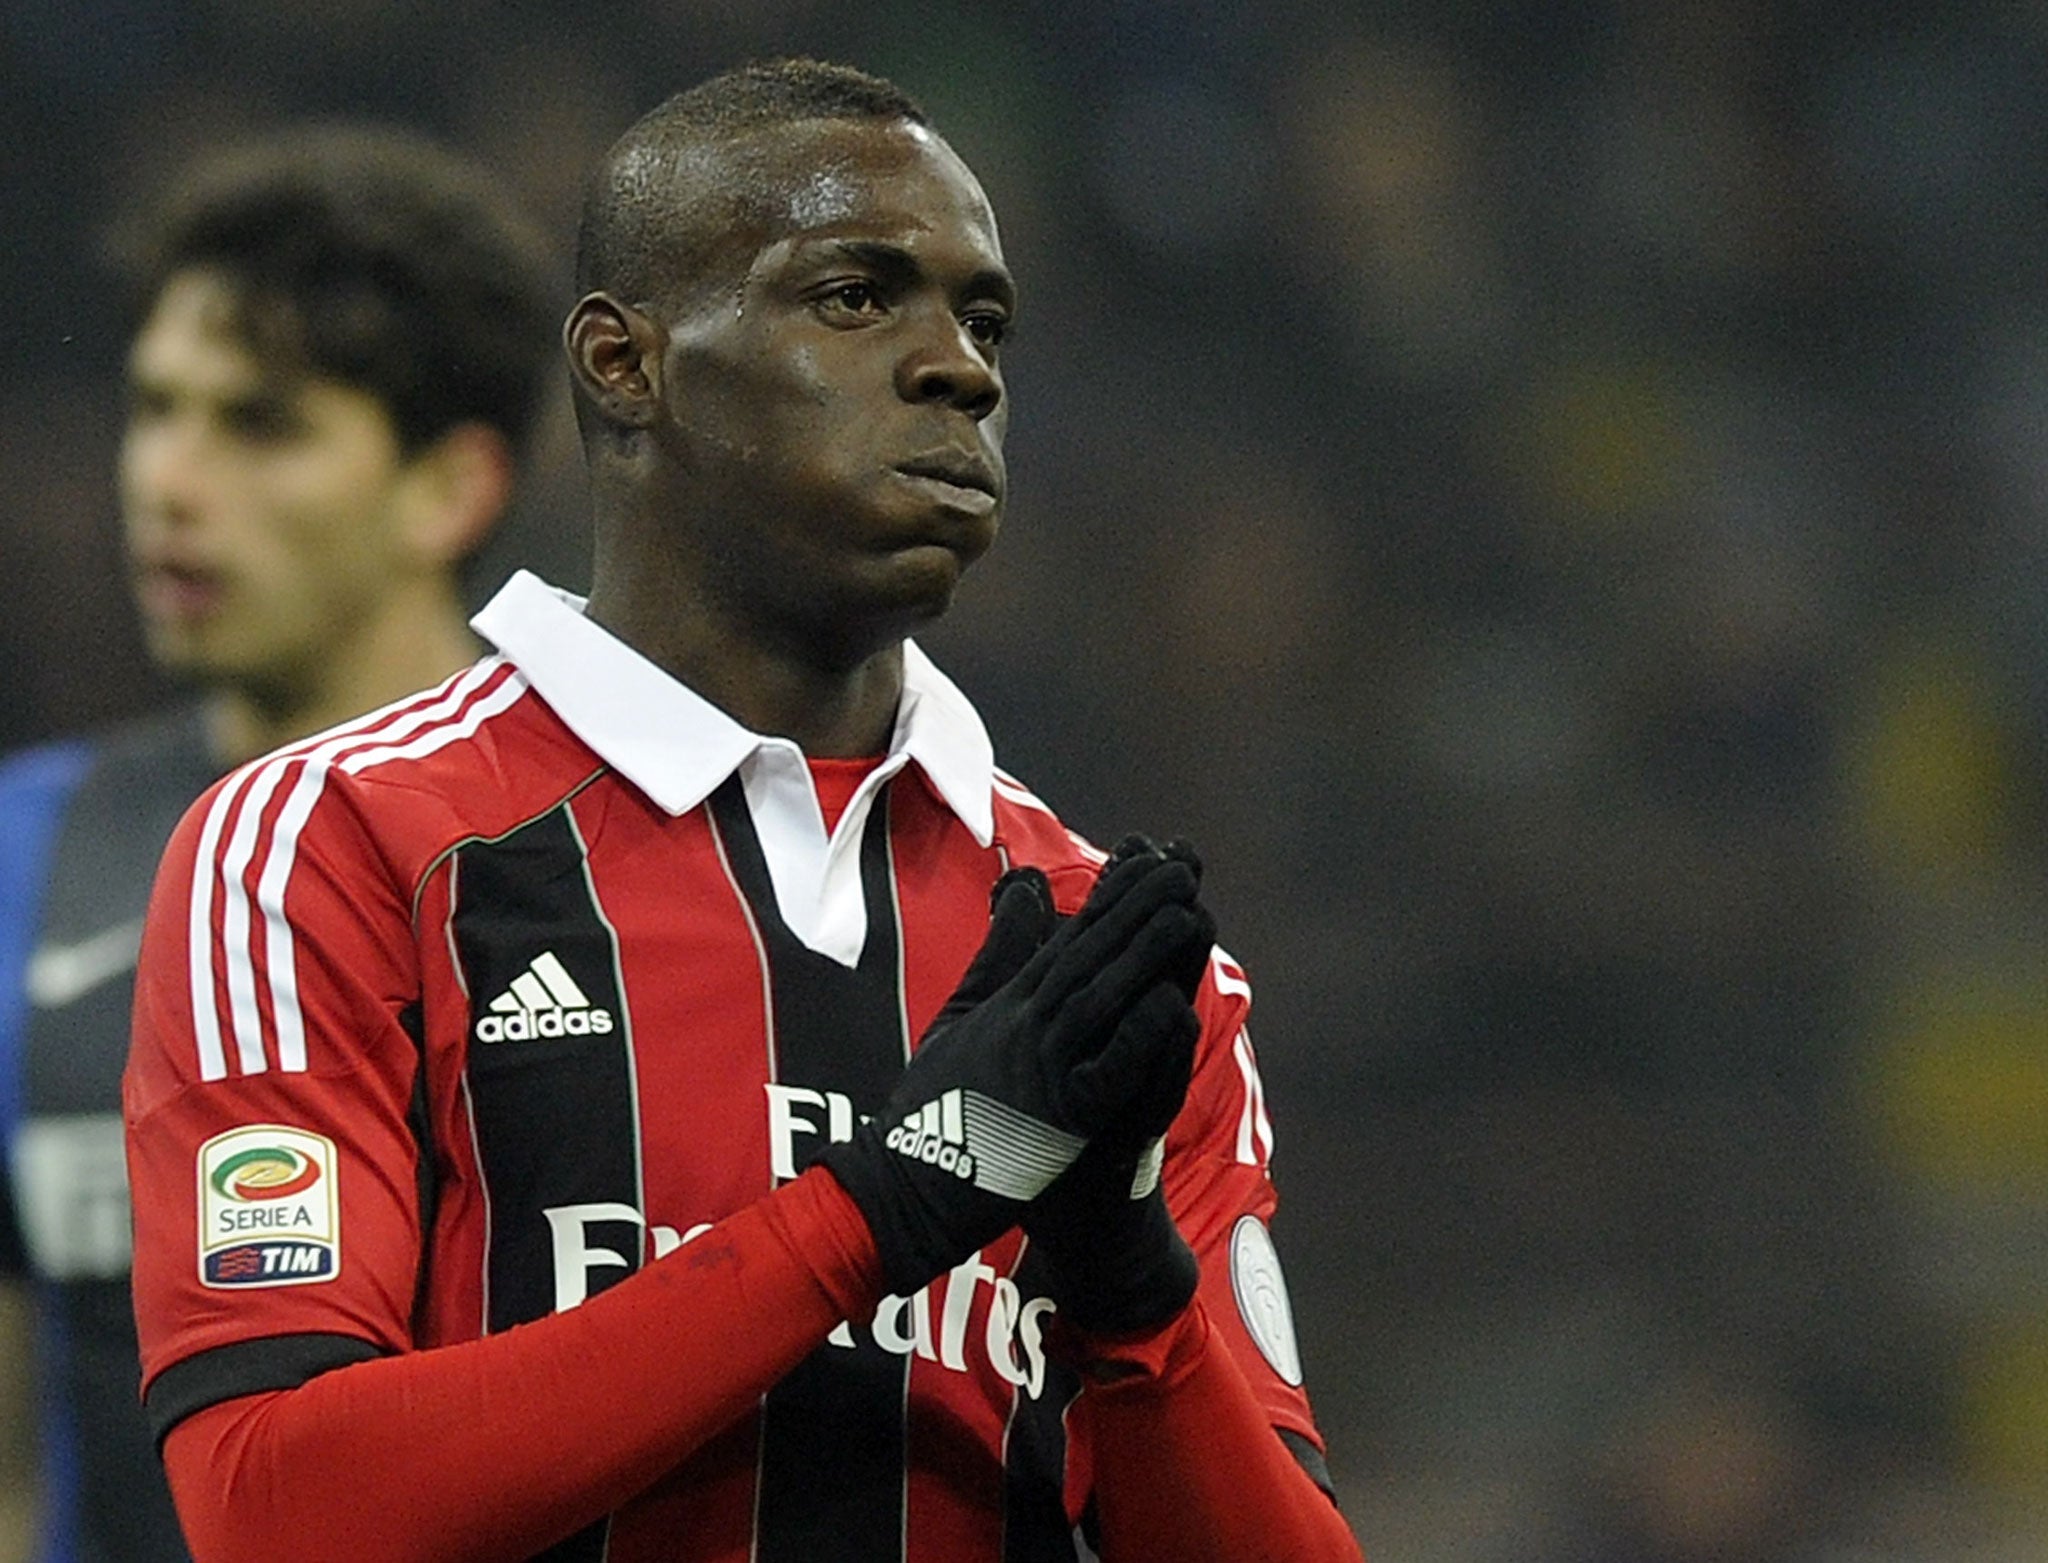 Another race row for Italian football: Mario Balotelli. Photo credit: The Independent